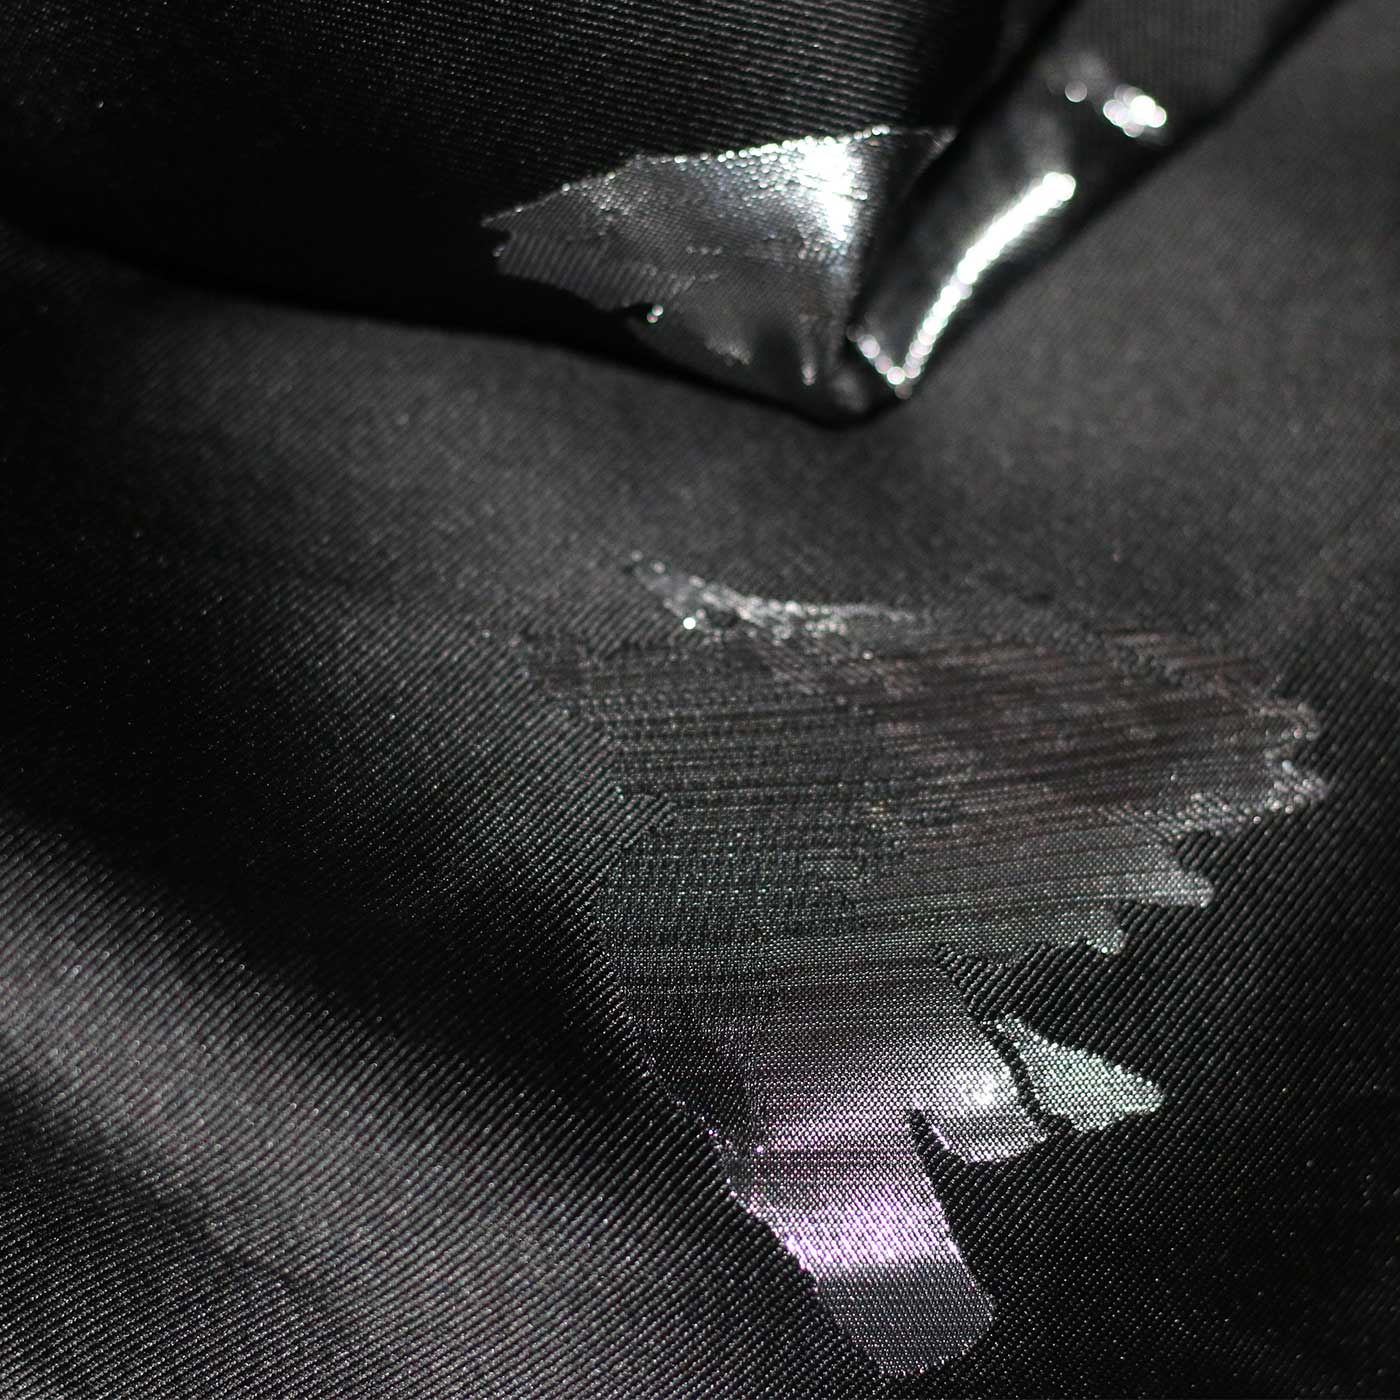 Black and Silver 3D Satin Floral Brocade fabric